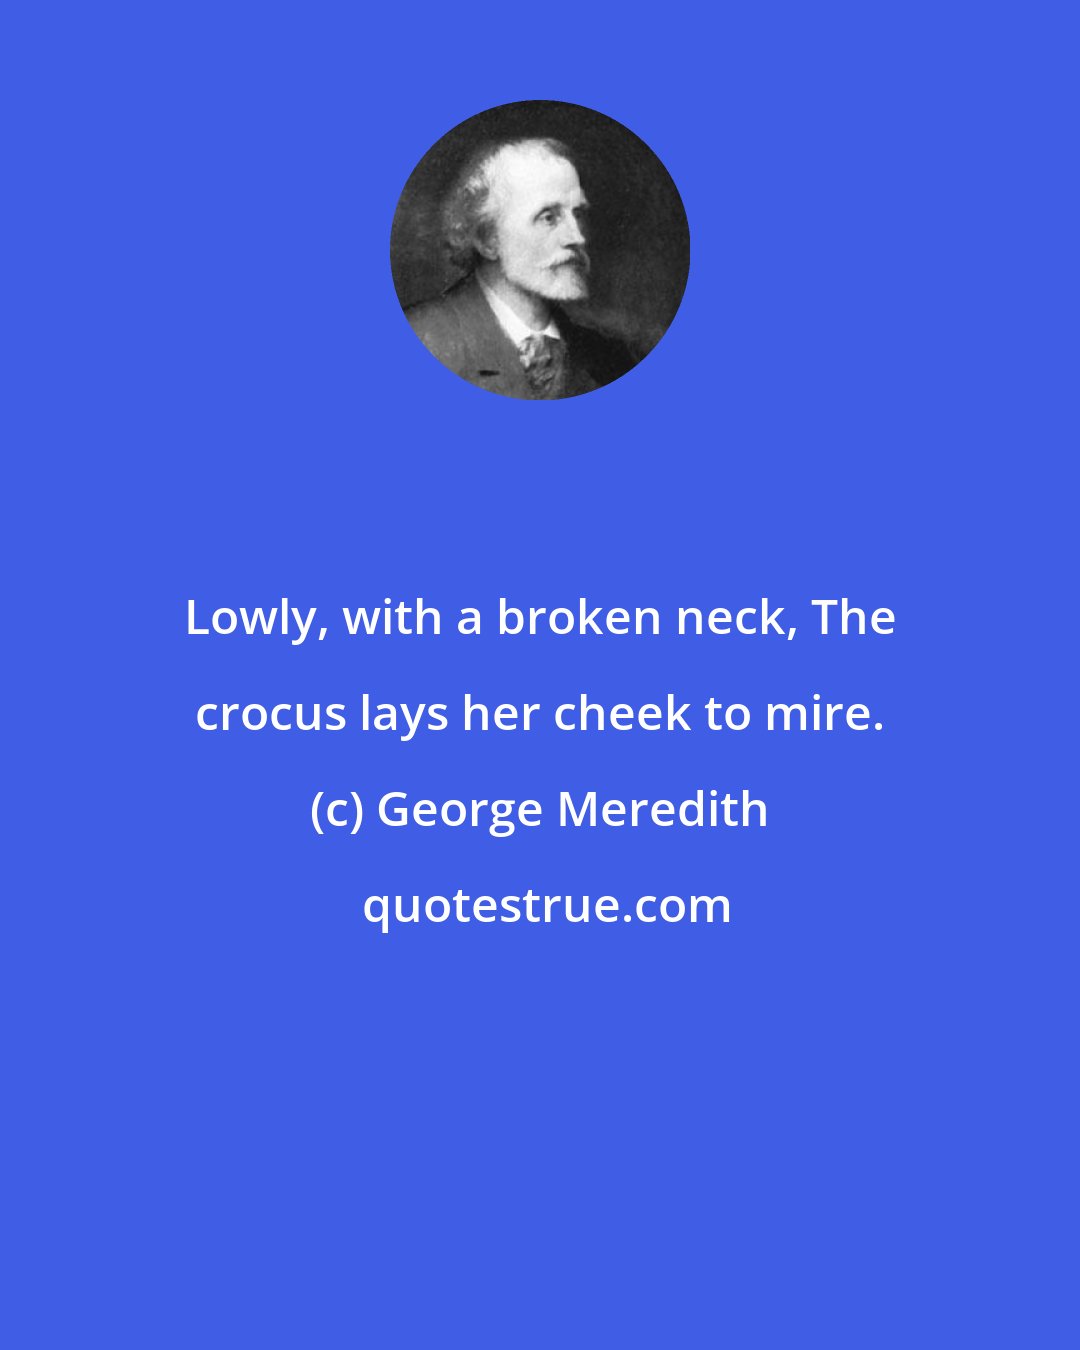 George Meredith: Lowly, with a broken neck, The crocus lays her cheek to mire.